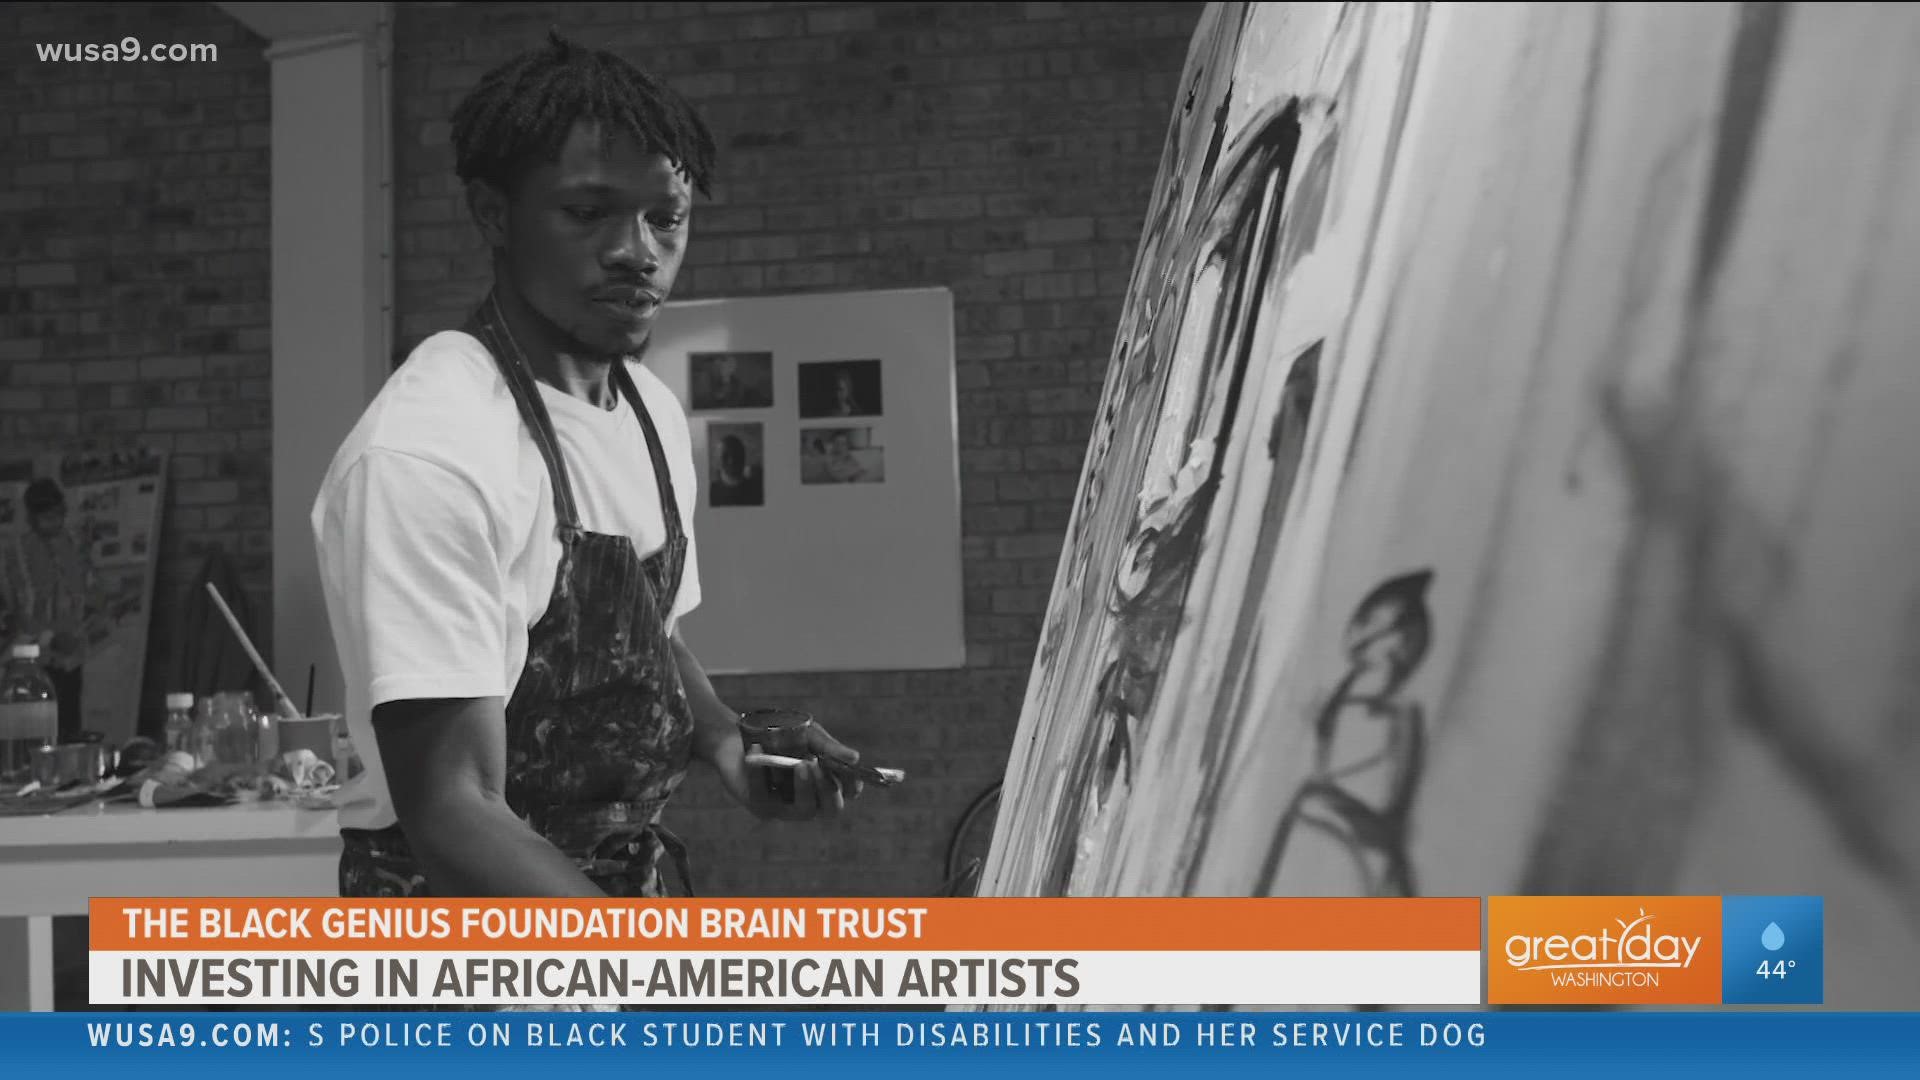 Simone Eccleston, founder of the Black Genius Foundation explains the need to help emerging African-American artists reach the next level.